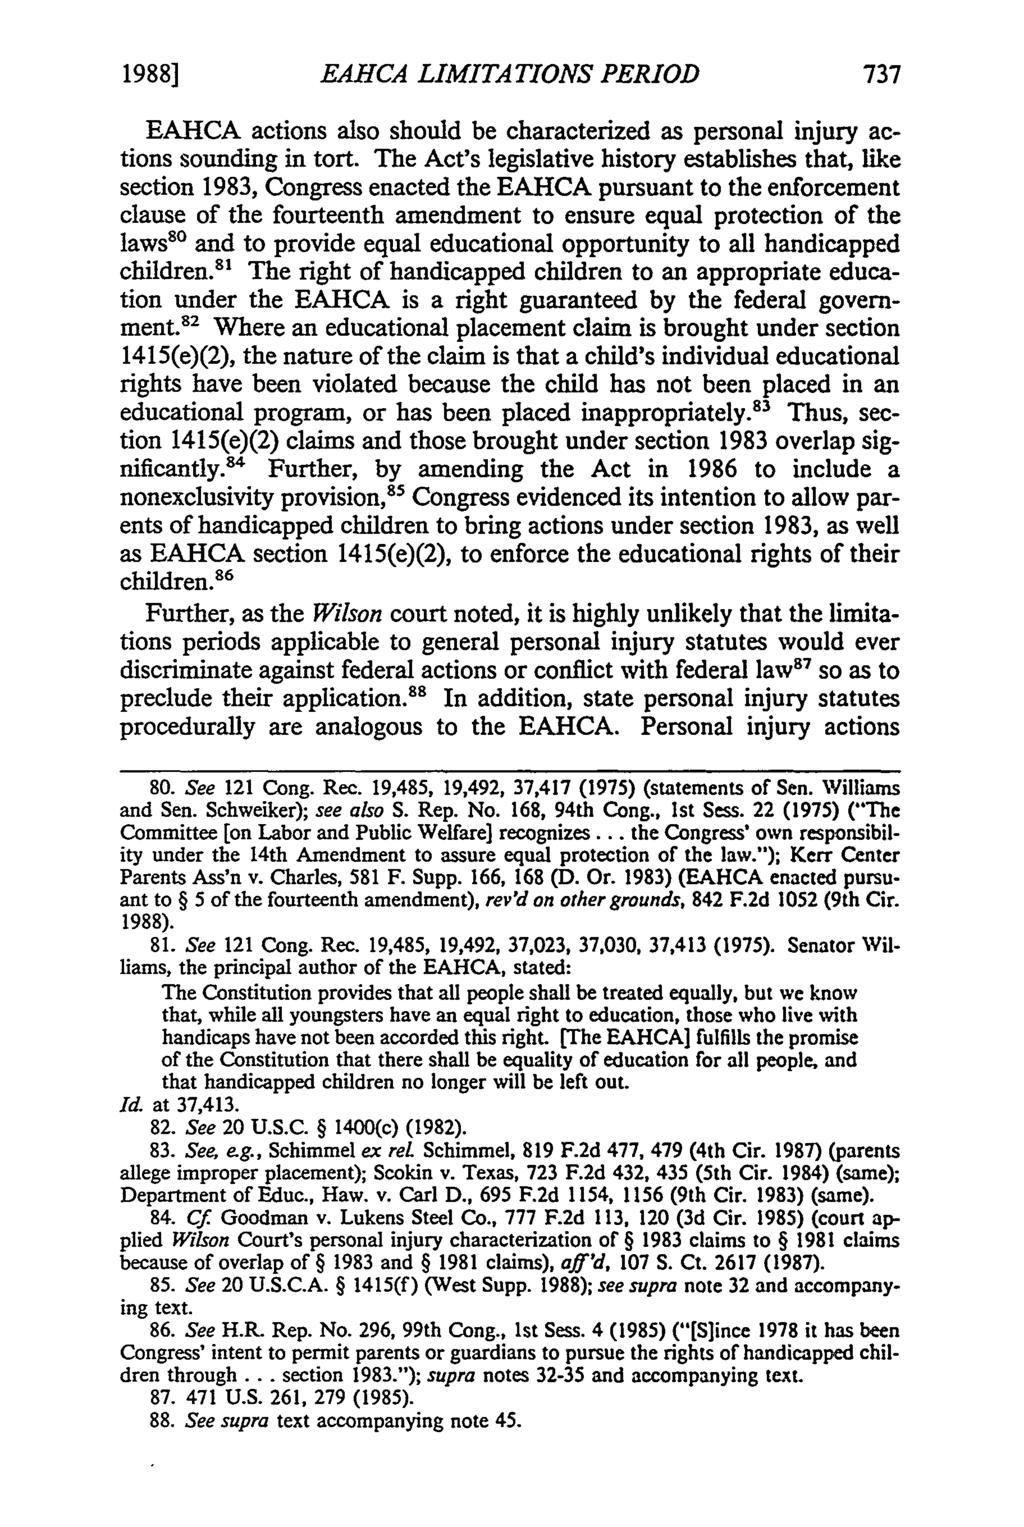 1988] EAHCA LIMITATIONS PERIOD EAHCA actions also should be characterized as personal injury actions sounding in tort.